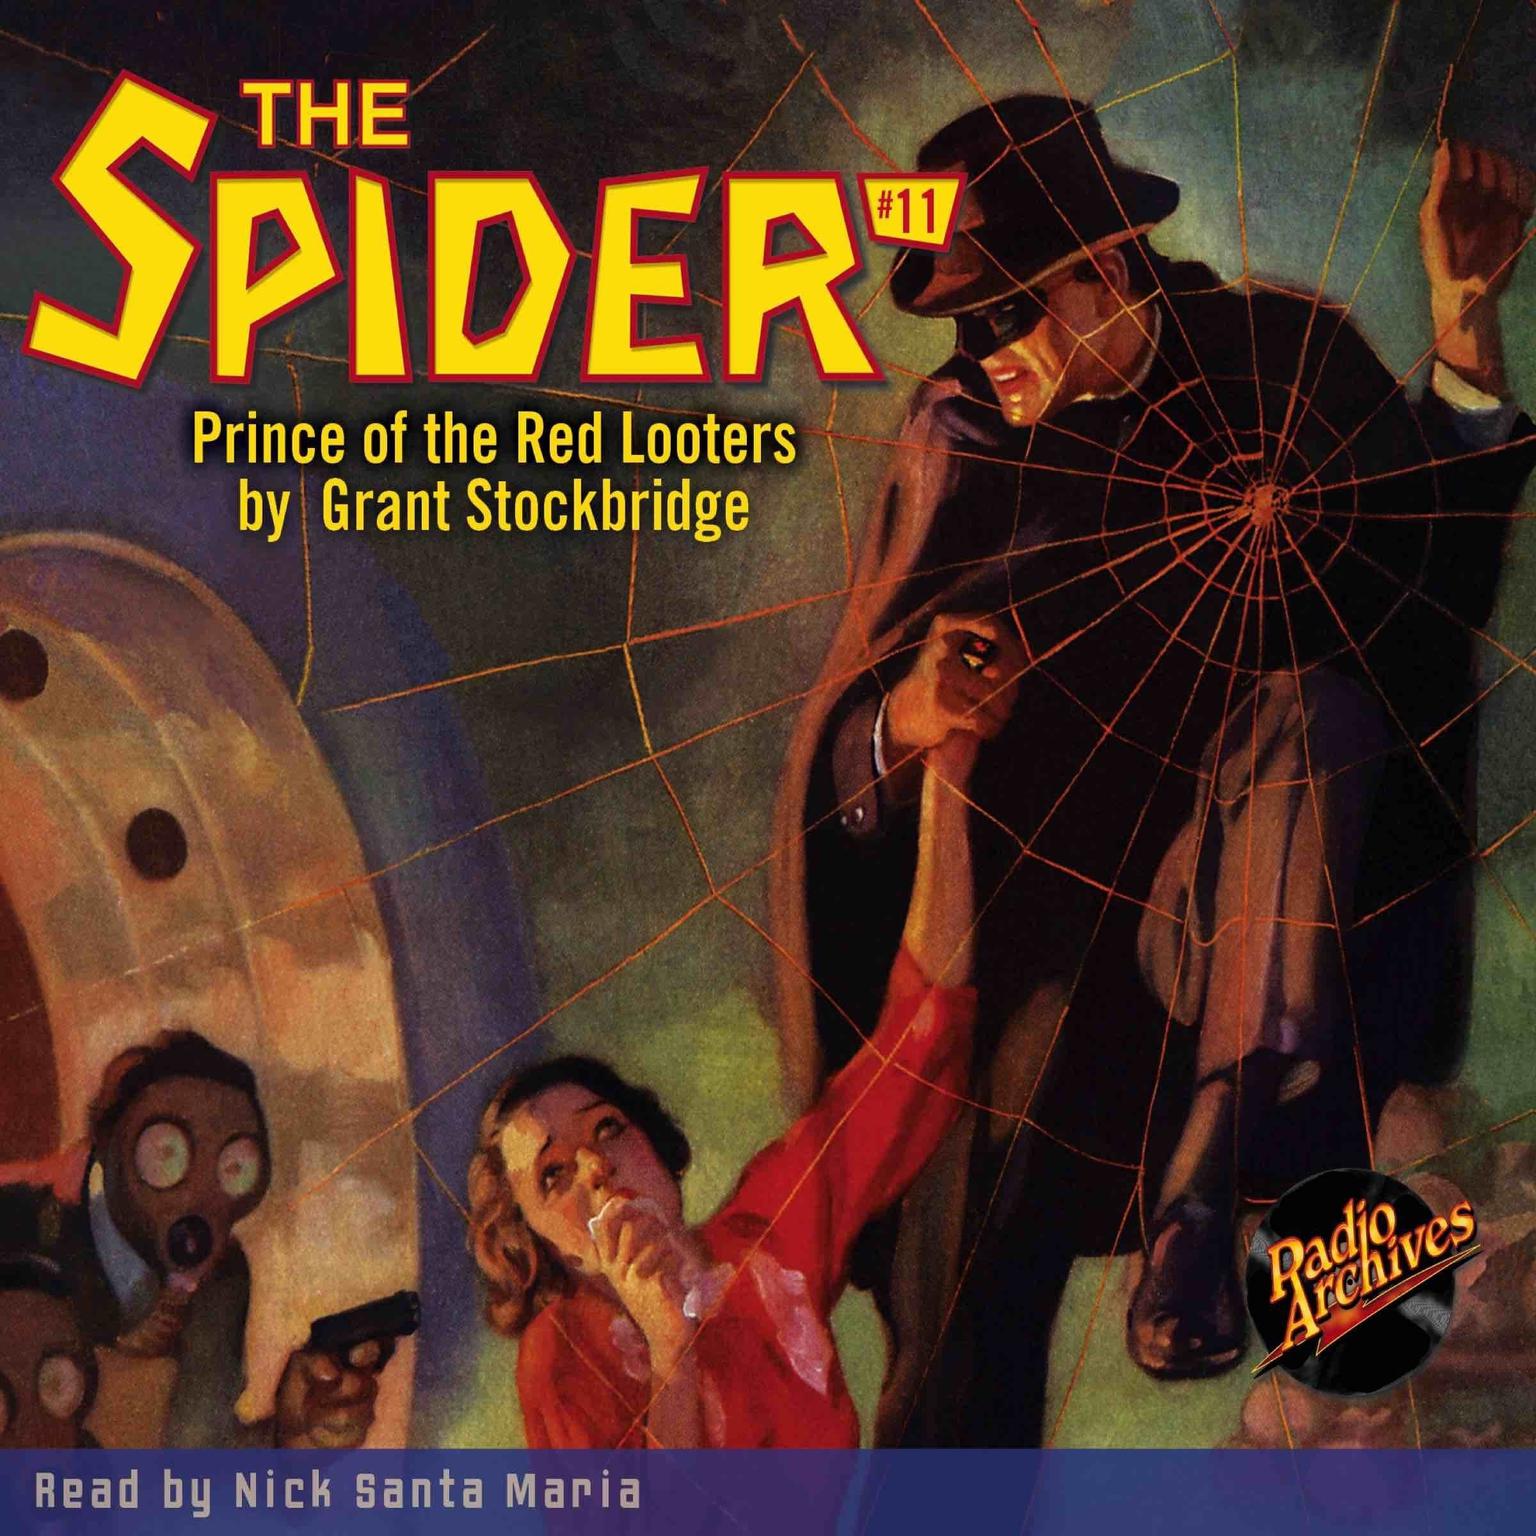 The Spider #11: Prince of the Red Looters Audiobook, by Grant Stockbridge